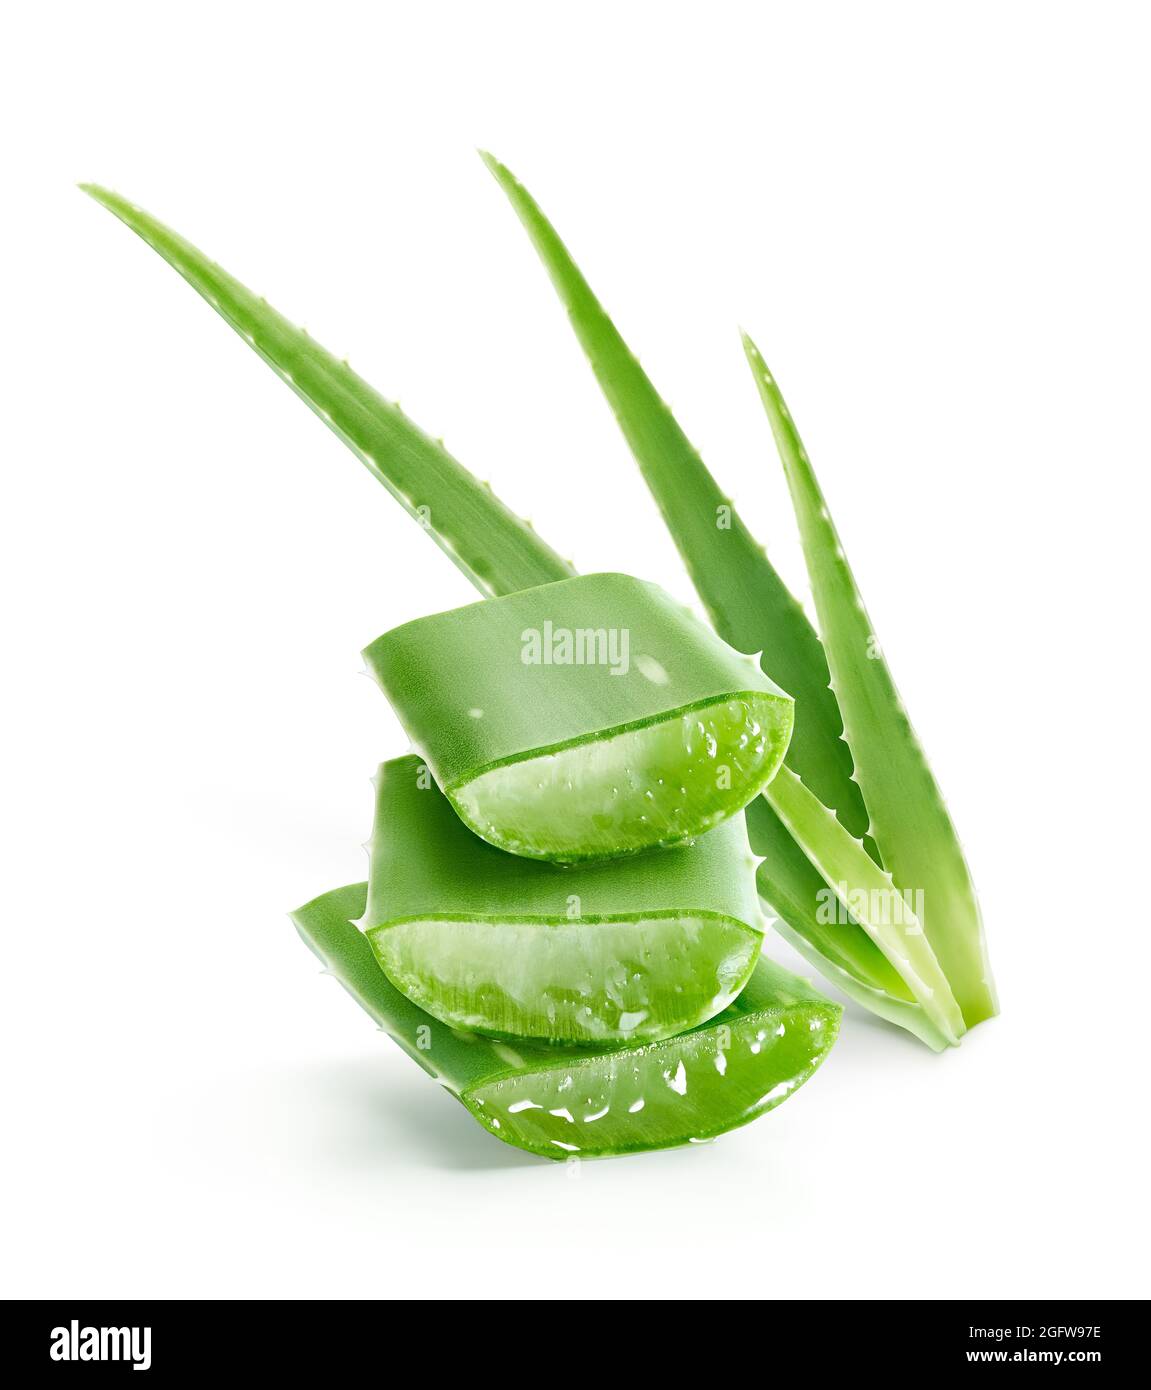 Aloe vera plant showcasing freshly dissected section Stock Photo